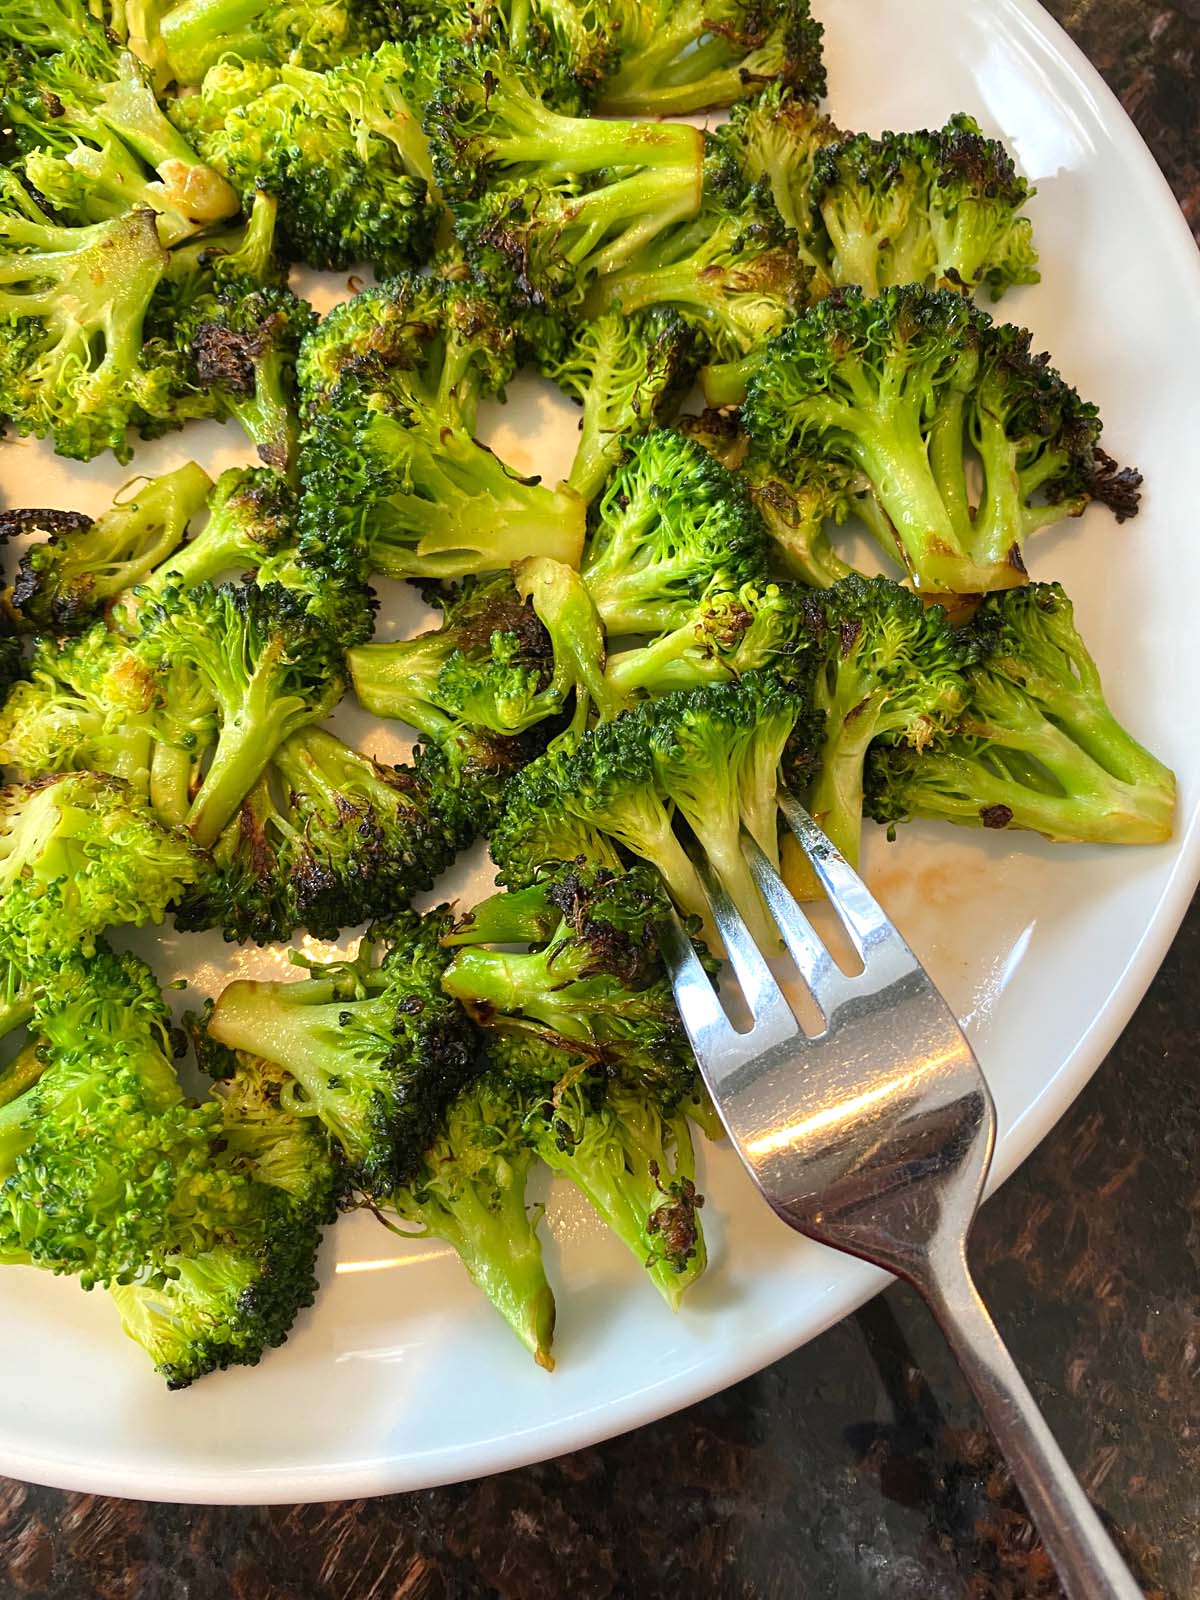 How to Cook Broccoli {Stovetop & Oven Instructions} - FeelGoodFoodie